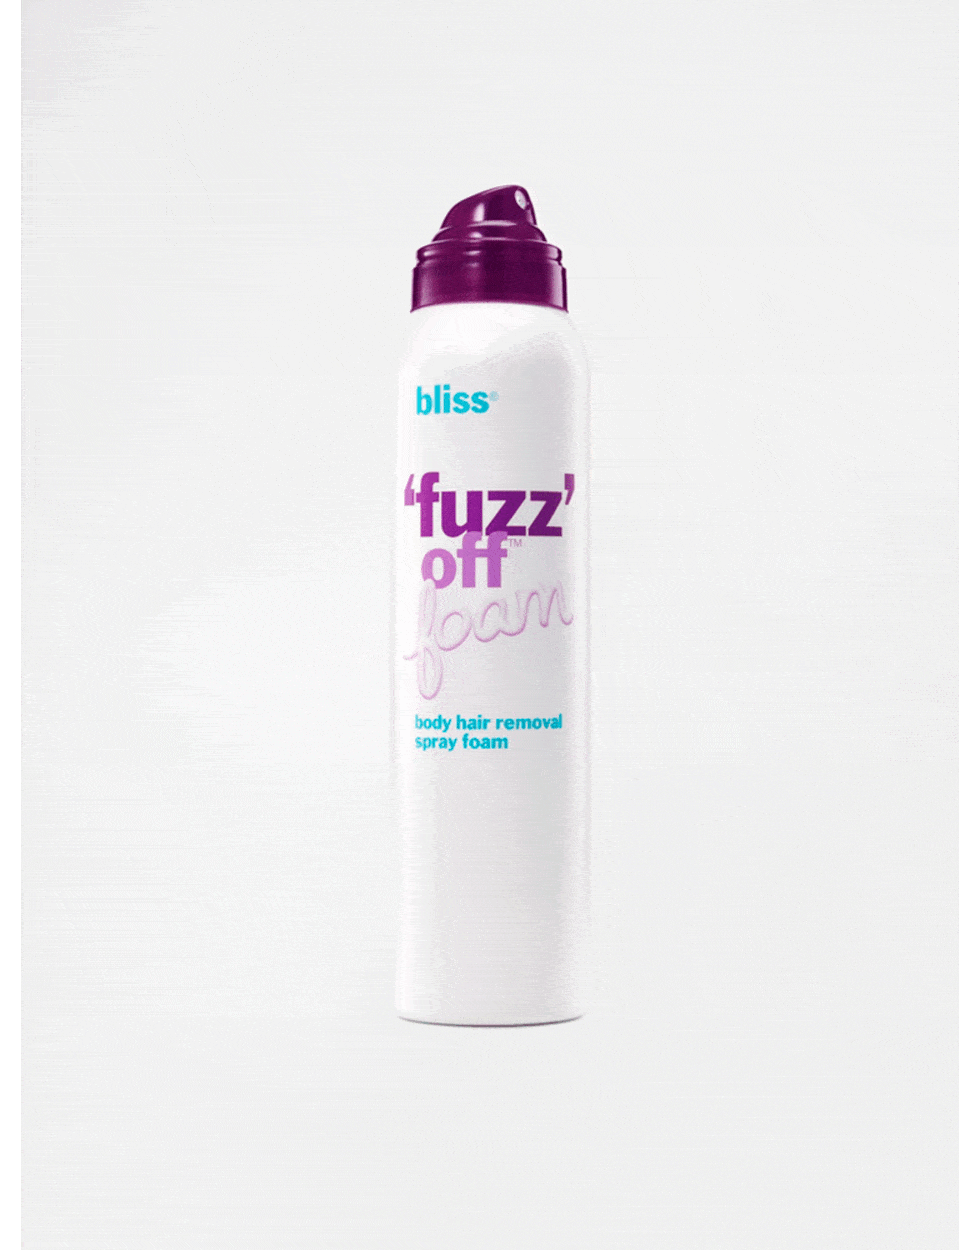 <p><a href="http://www.asos.com/bliss/bliss-fuzz-off-foam-162ml/prod/pgeproduct.aspx?iid=5338400&clr=Foam&SearchQuery=fuzz+off&pgesize=3&pge=0&totalstyles=3&gridsize=3&gridrow=1&gridcolumn=1" target="_blank">Bliss Fuzz-Off Foam 162ml £26</a></p>

<p>This 